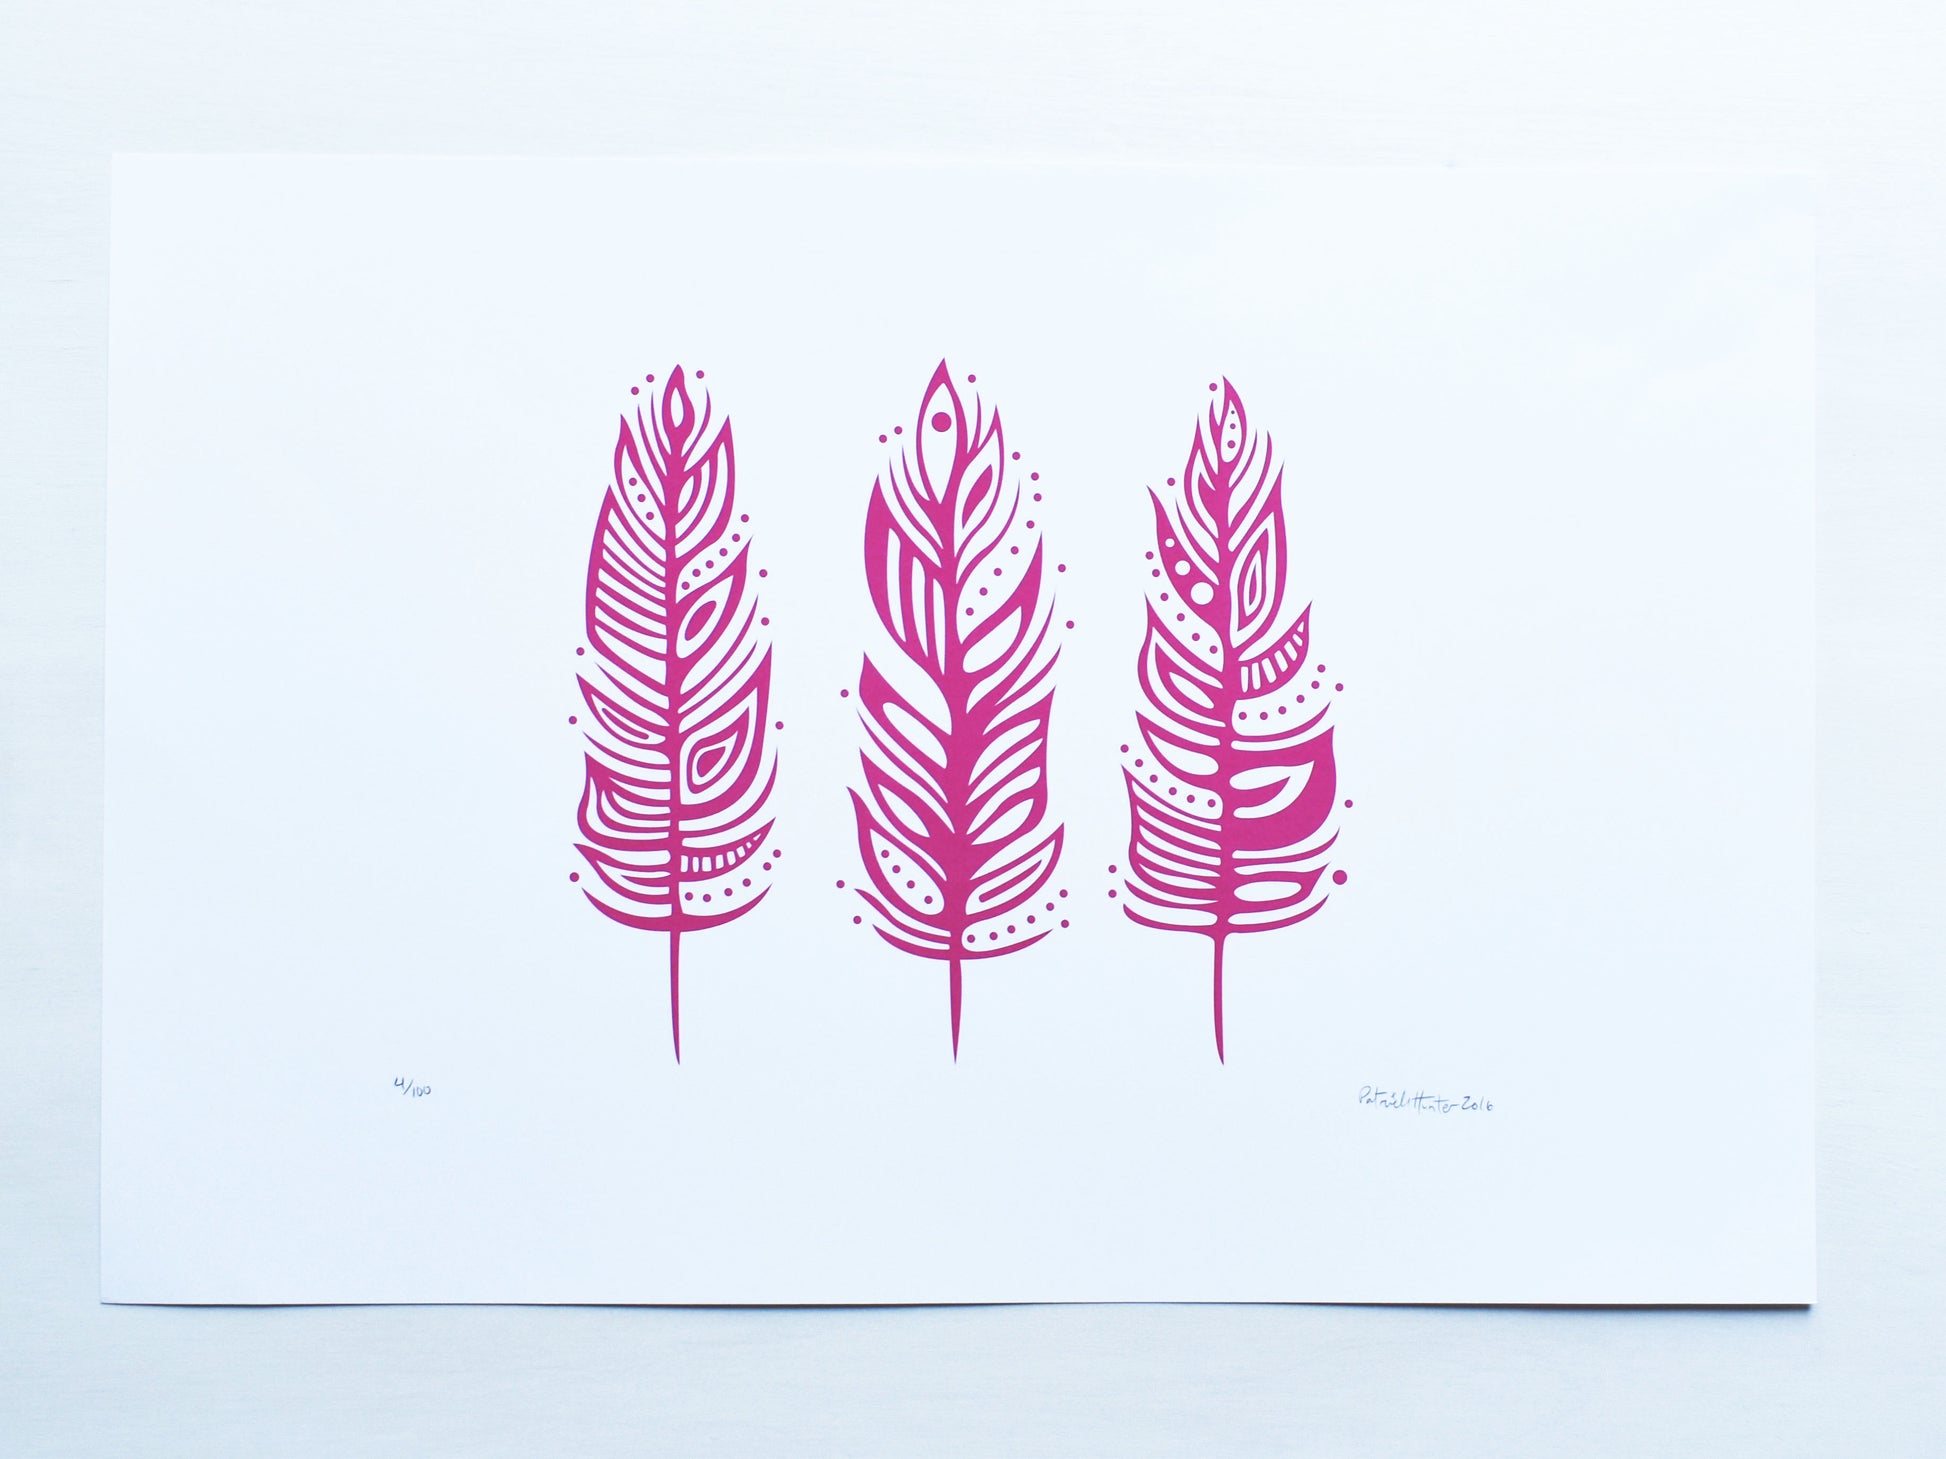 Print of Patrick Hunter's painting of three feathers, pink on white, woodland art style.